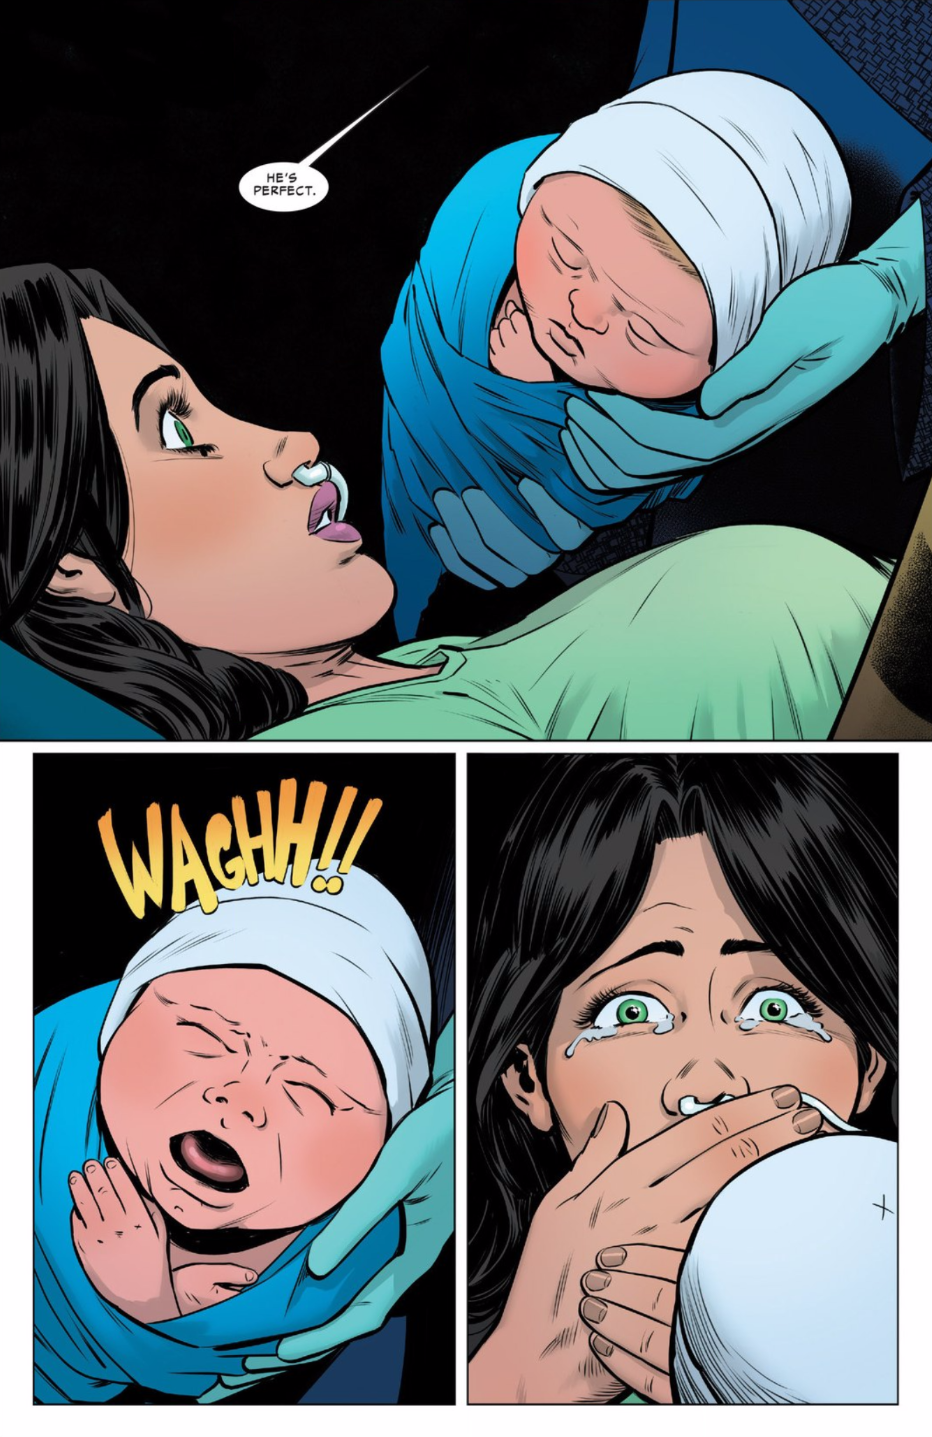 Spider-Woman Just Had A Baby